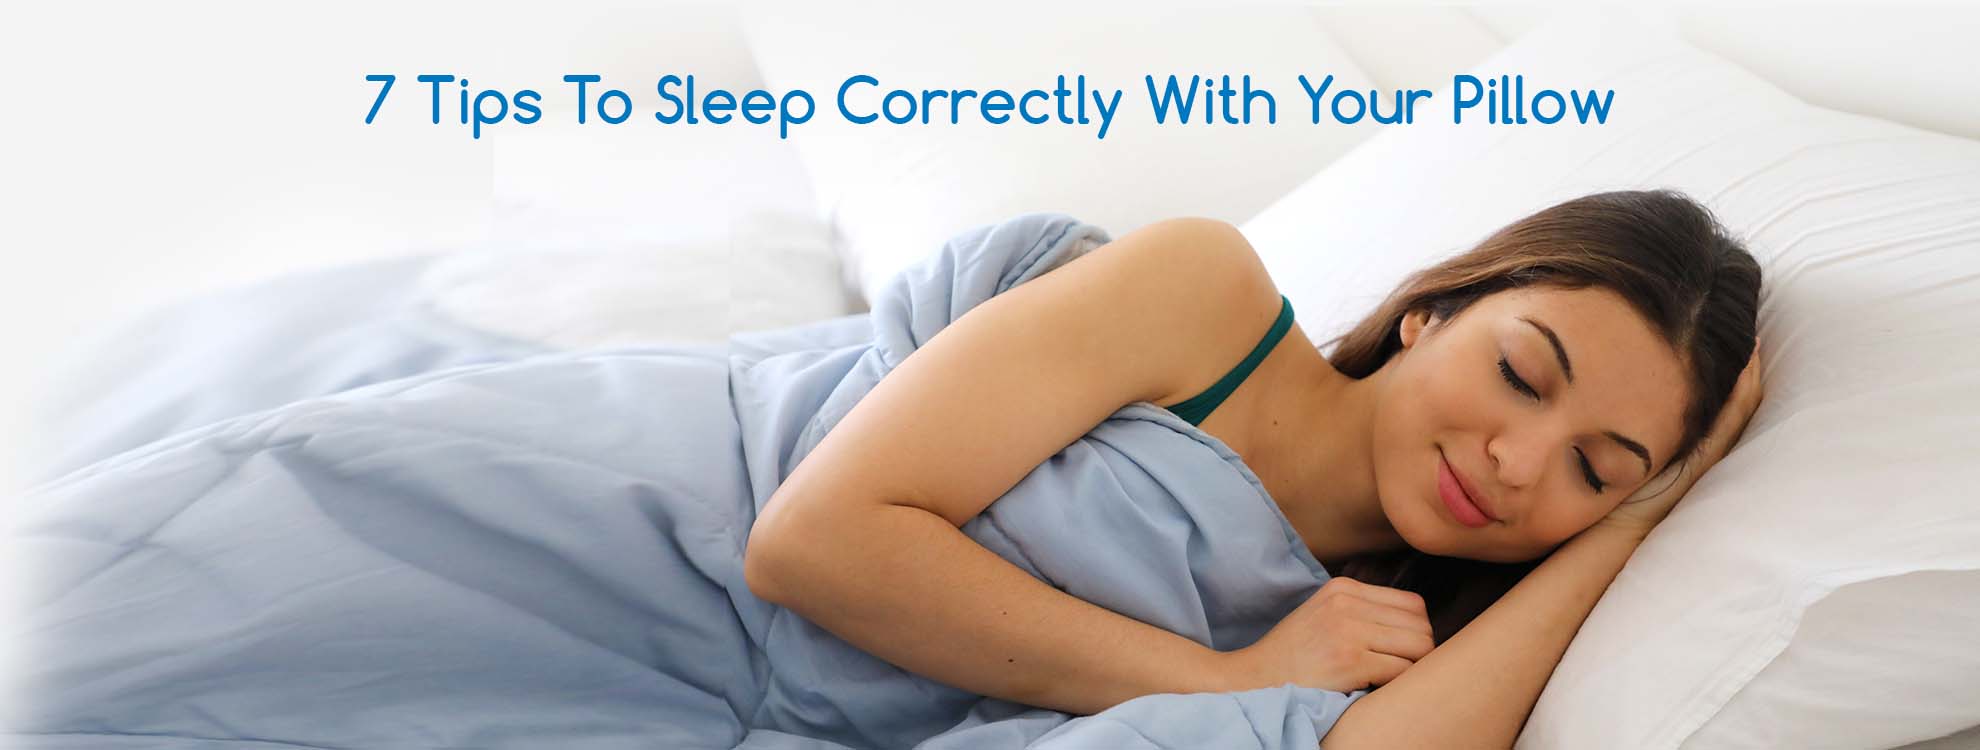 Right Between the Knees: Benefits of Sleeping With a Pillow